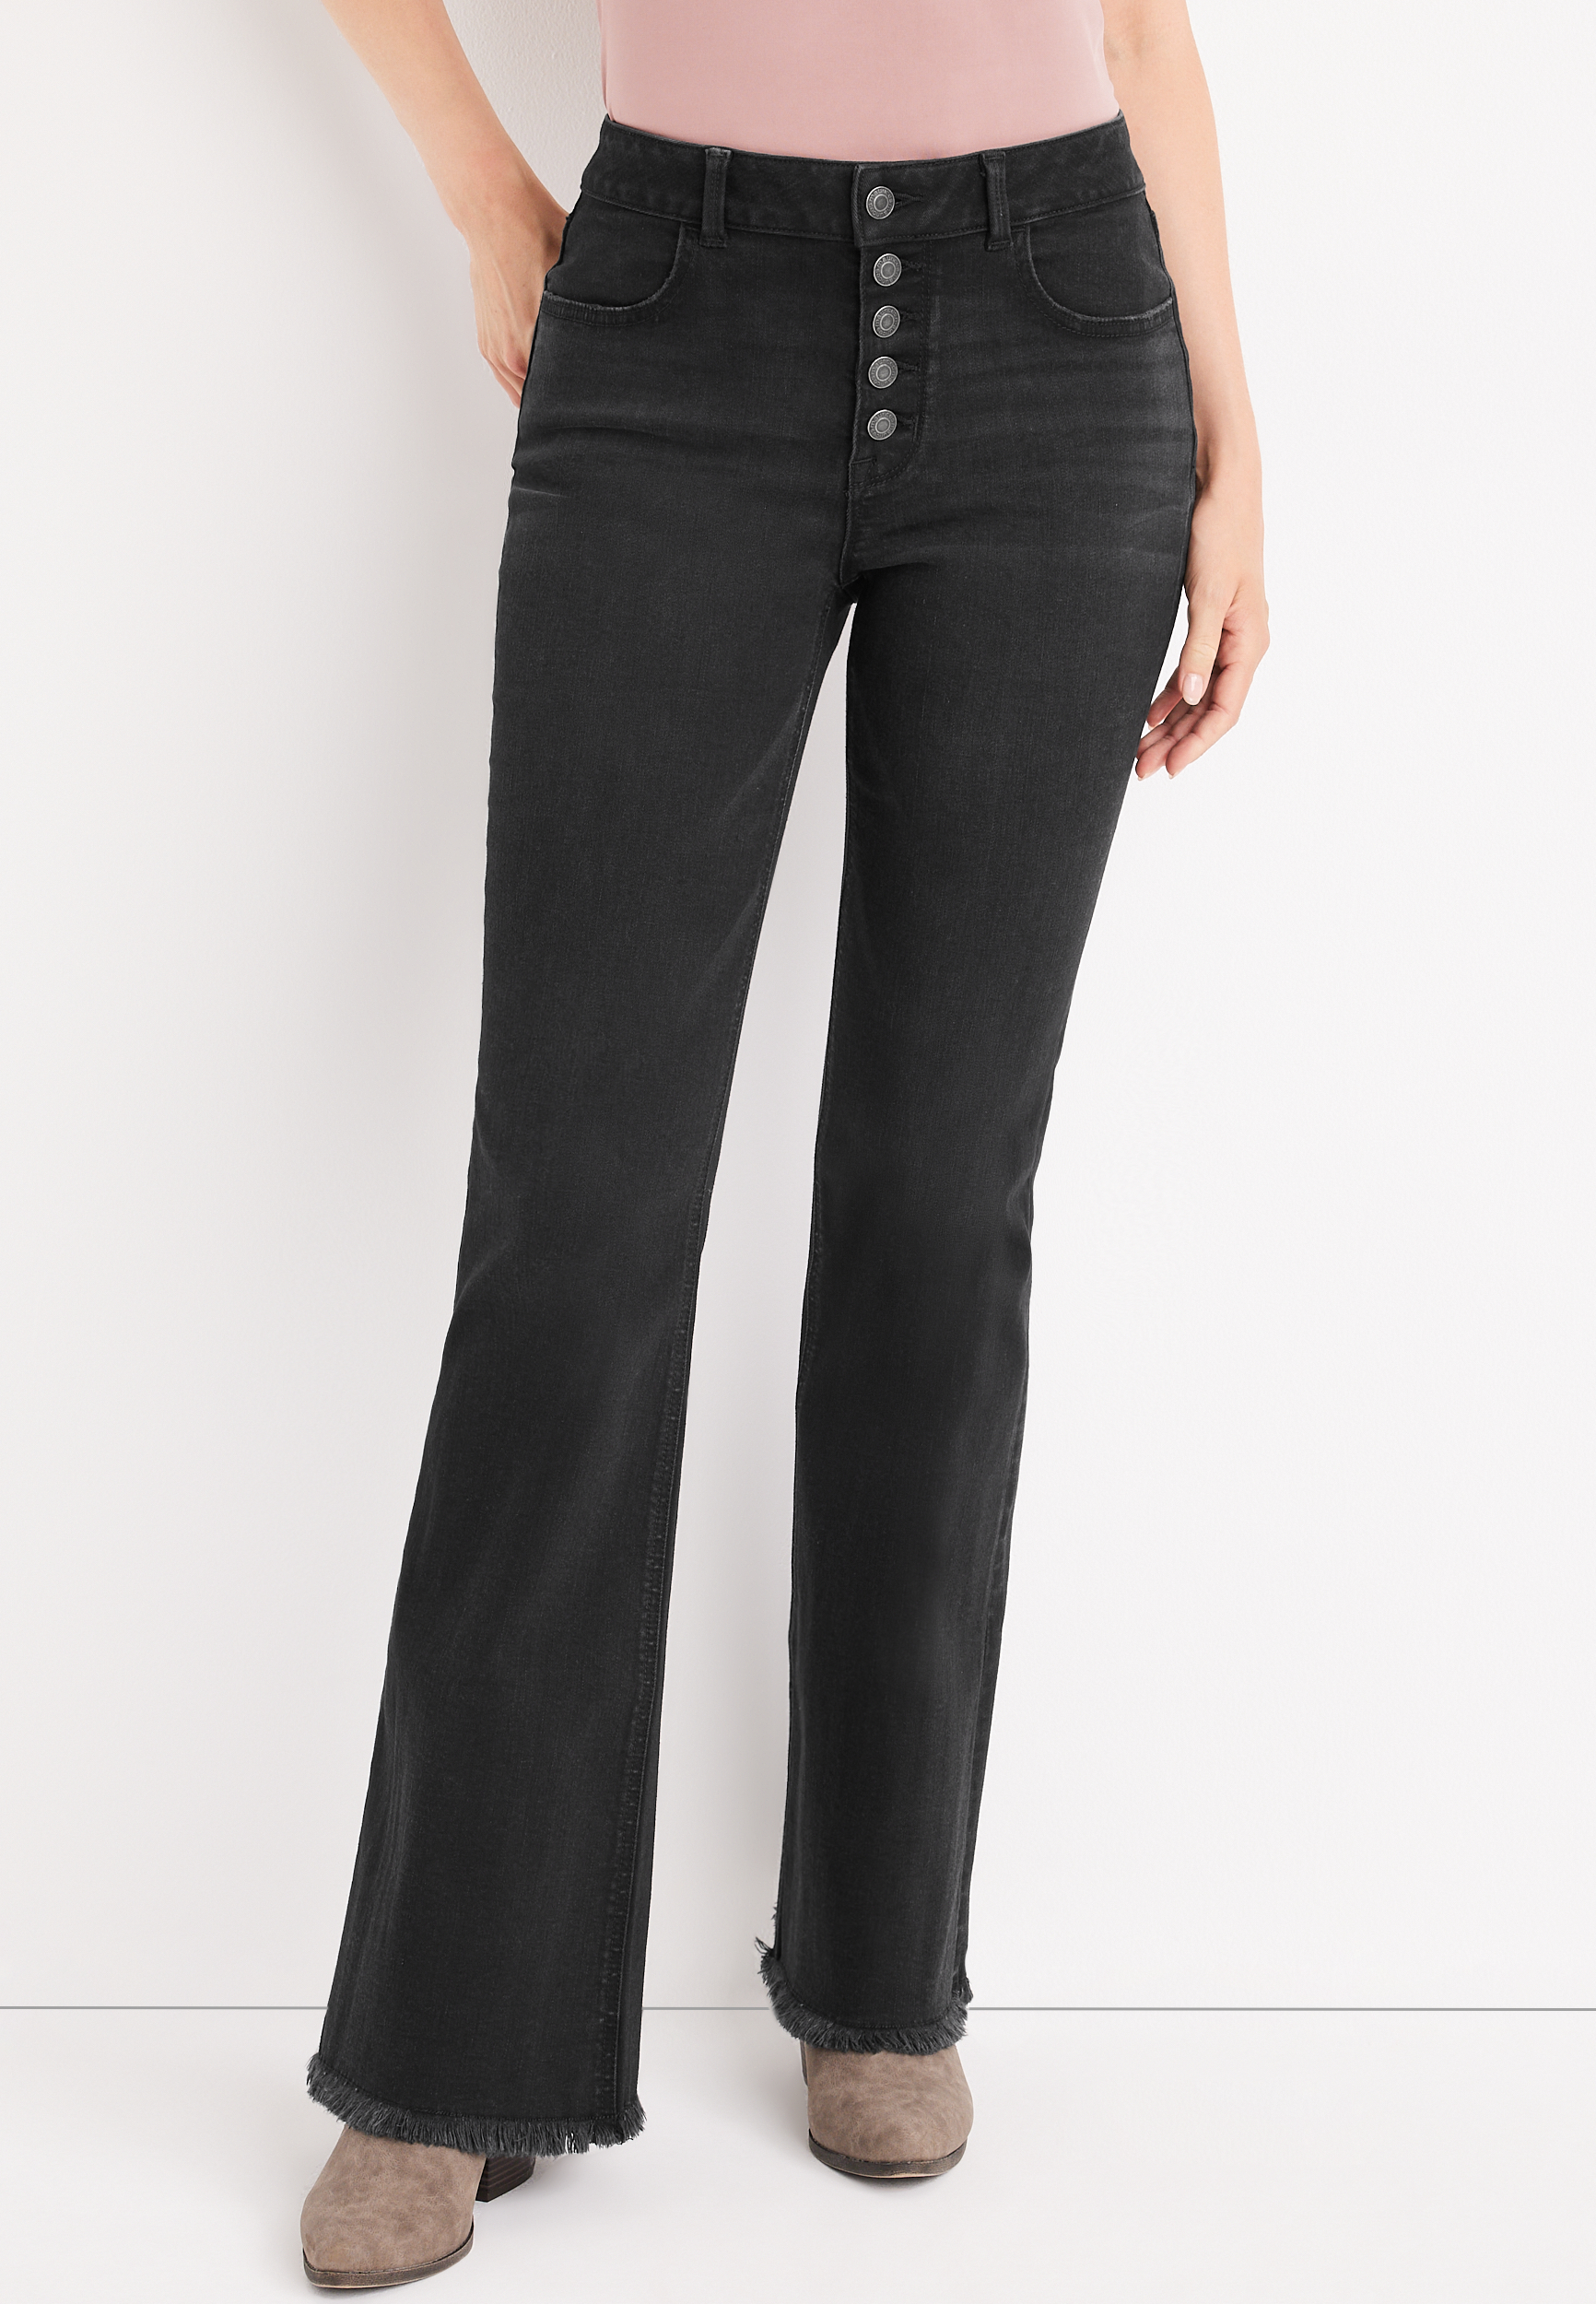 Mentalt Satire drikke m jeans by maurices™ Flare High Rise Black Button Fly Jean | maurices